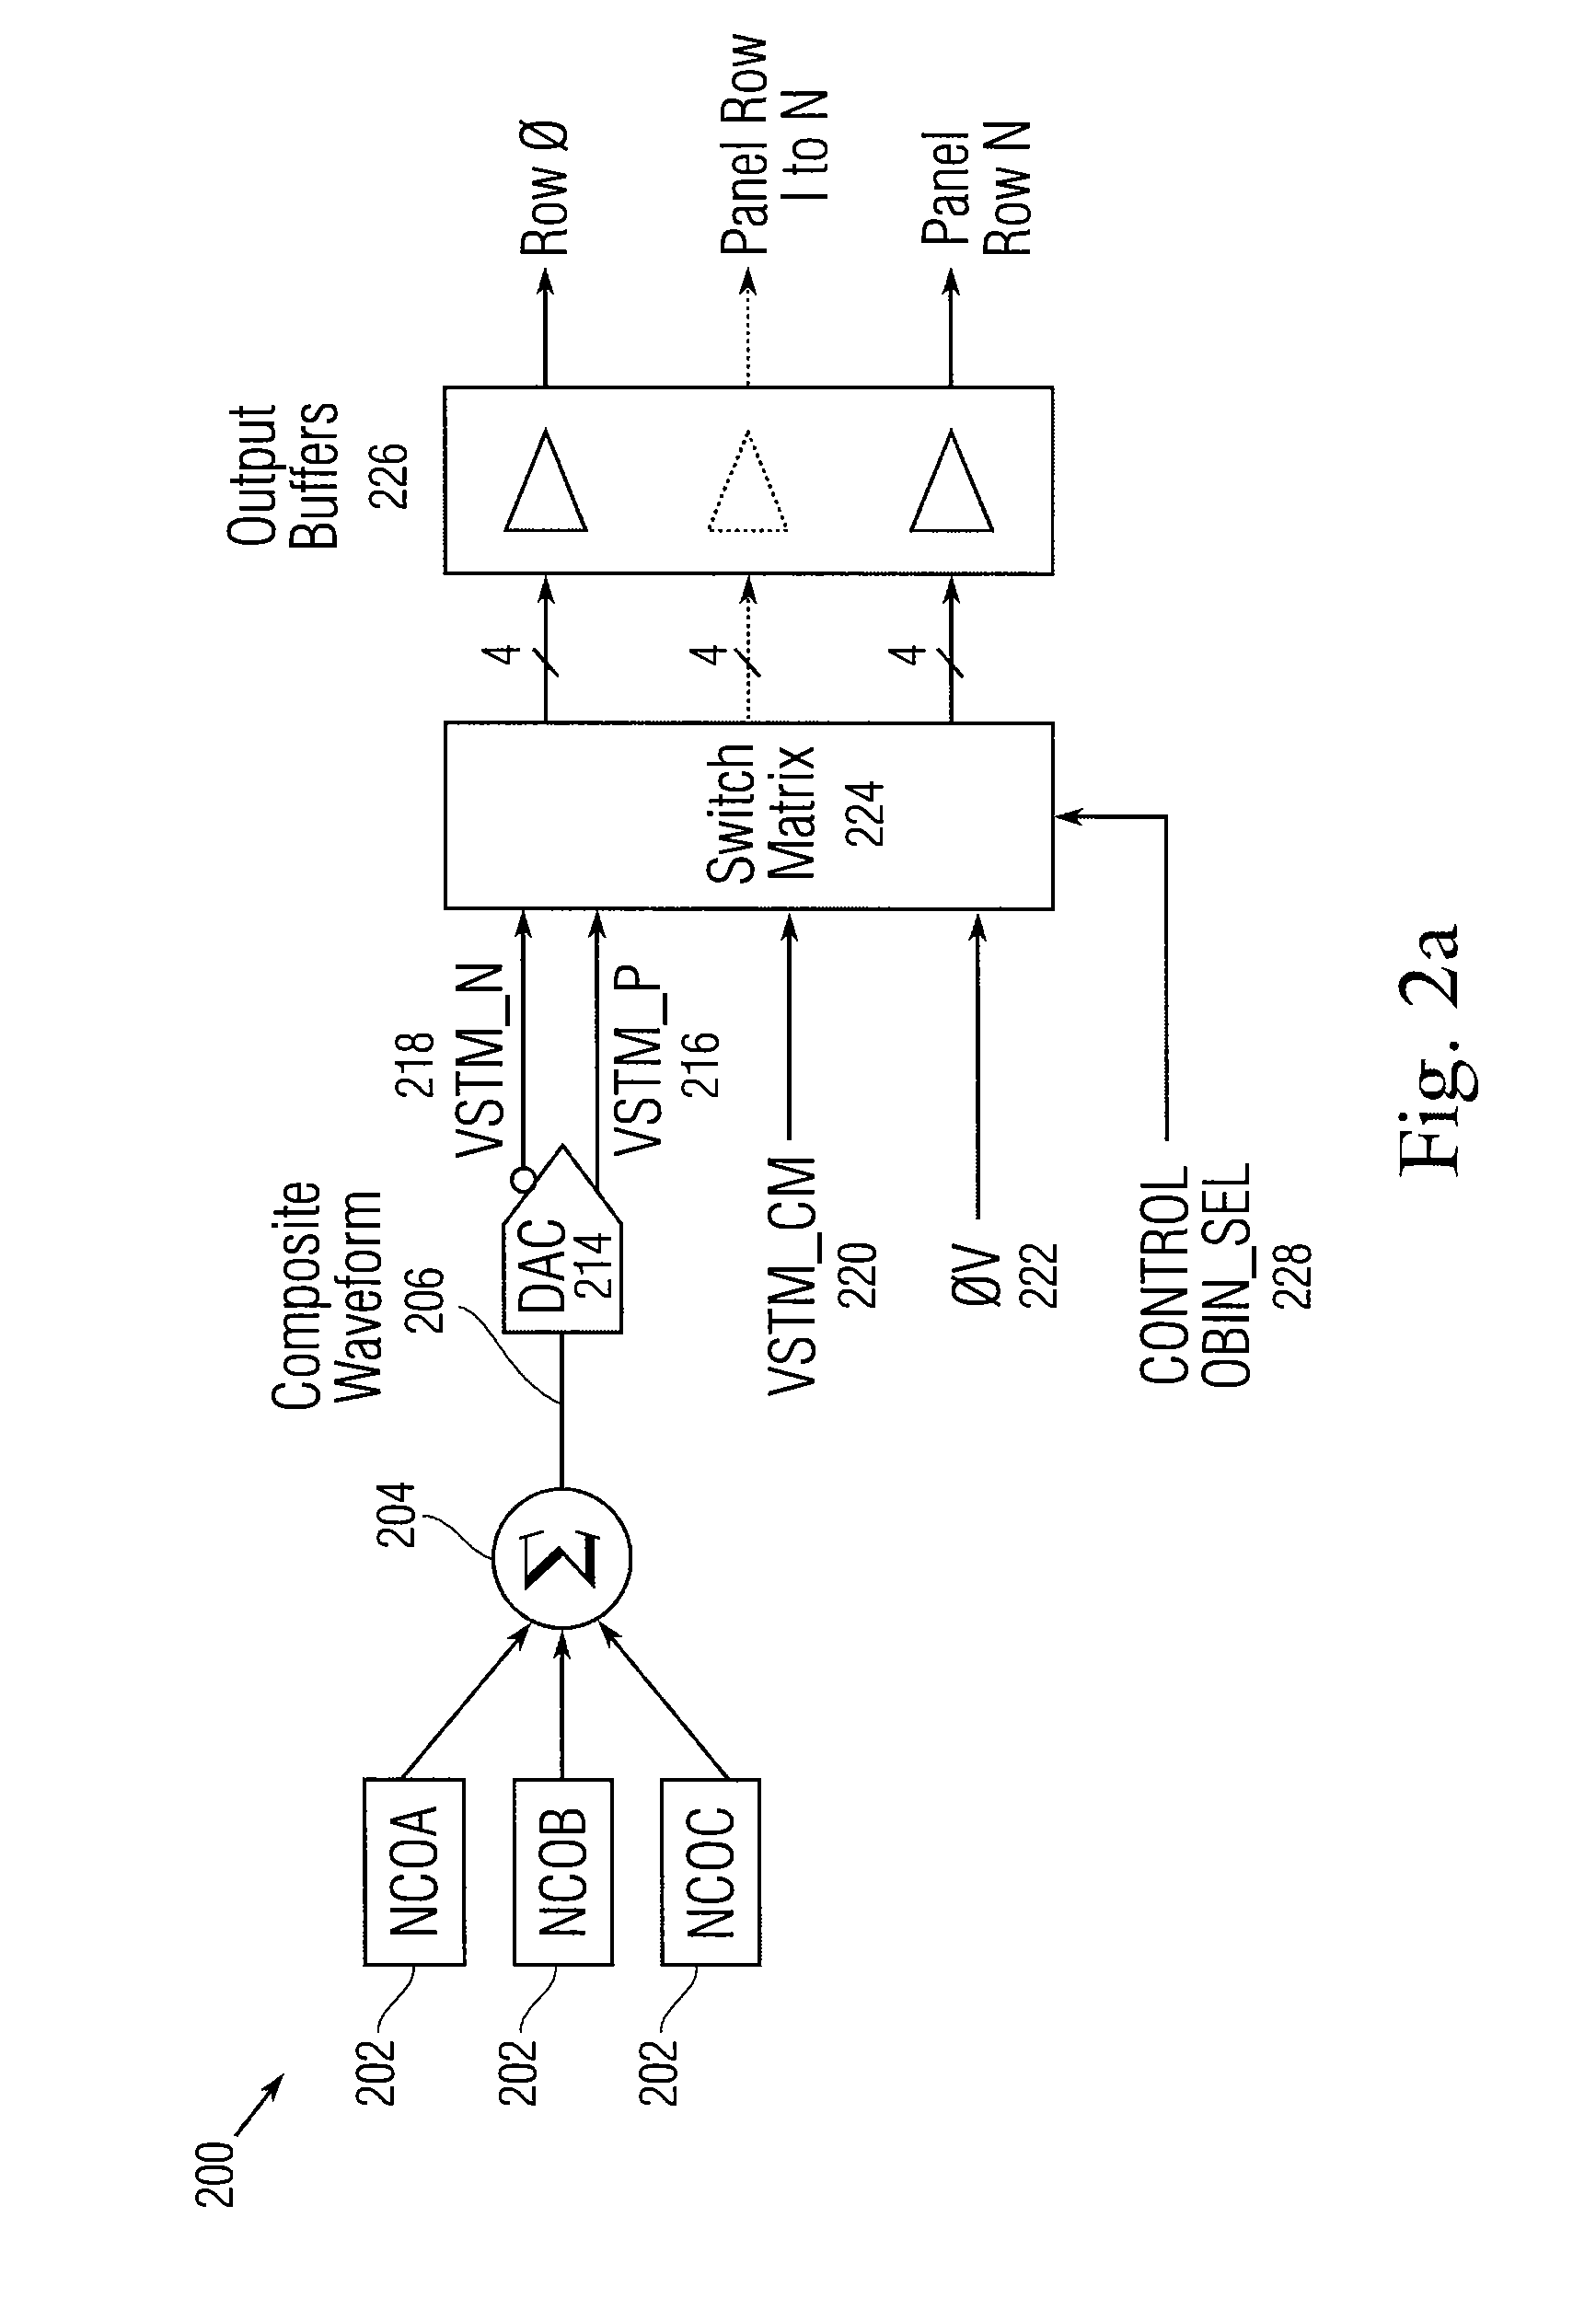 Auto Scanning for Multiple Frequency Stimulation Multi-Touch Sensor Panels